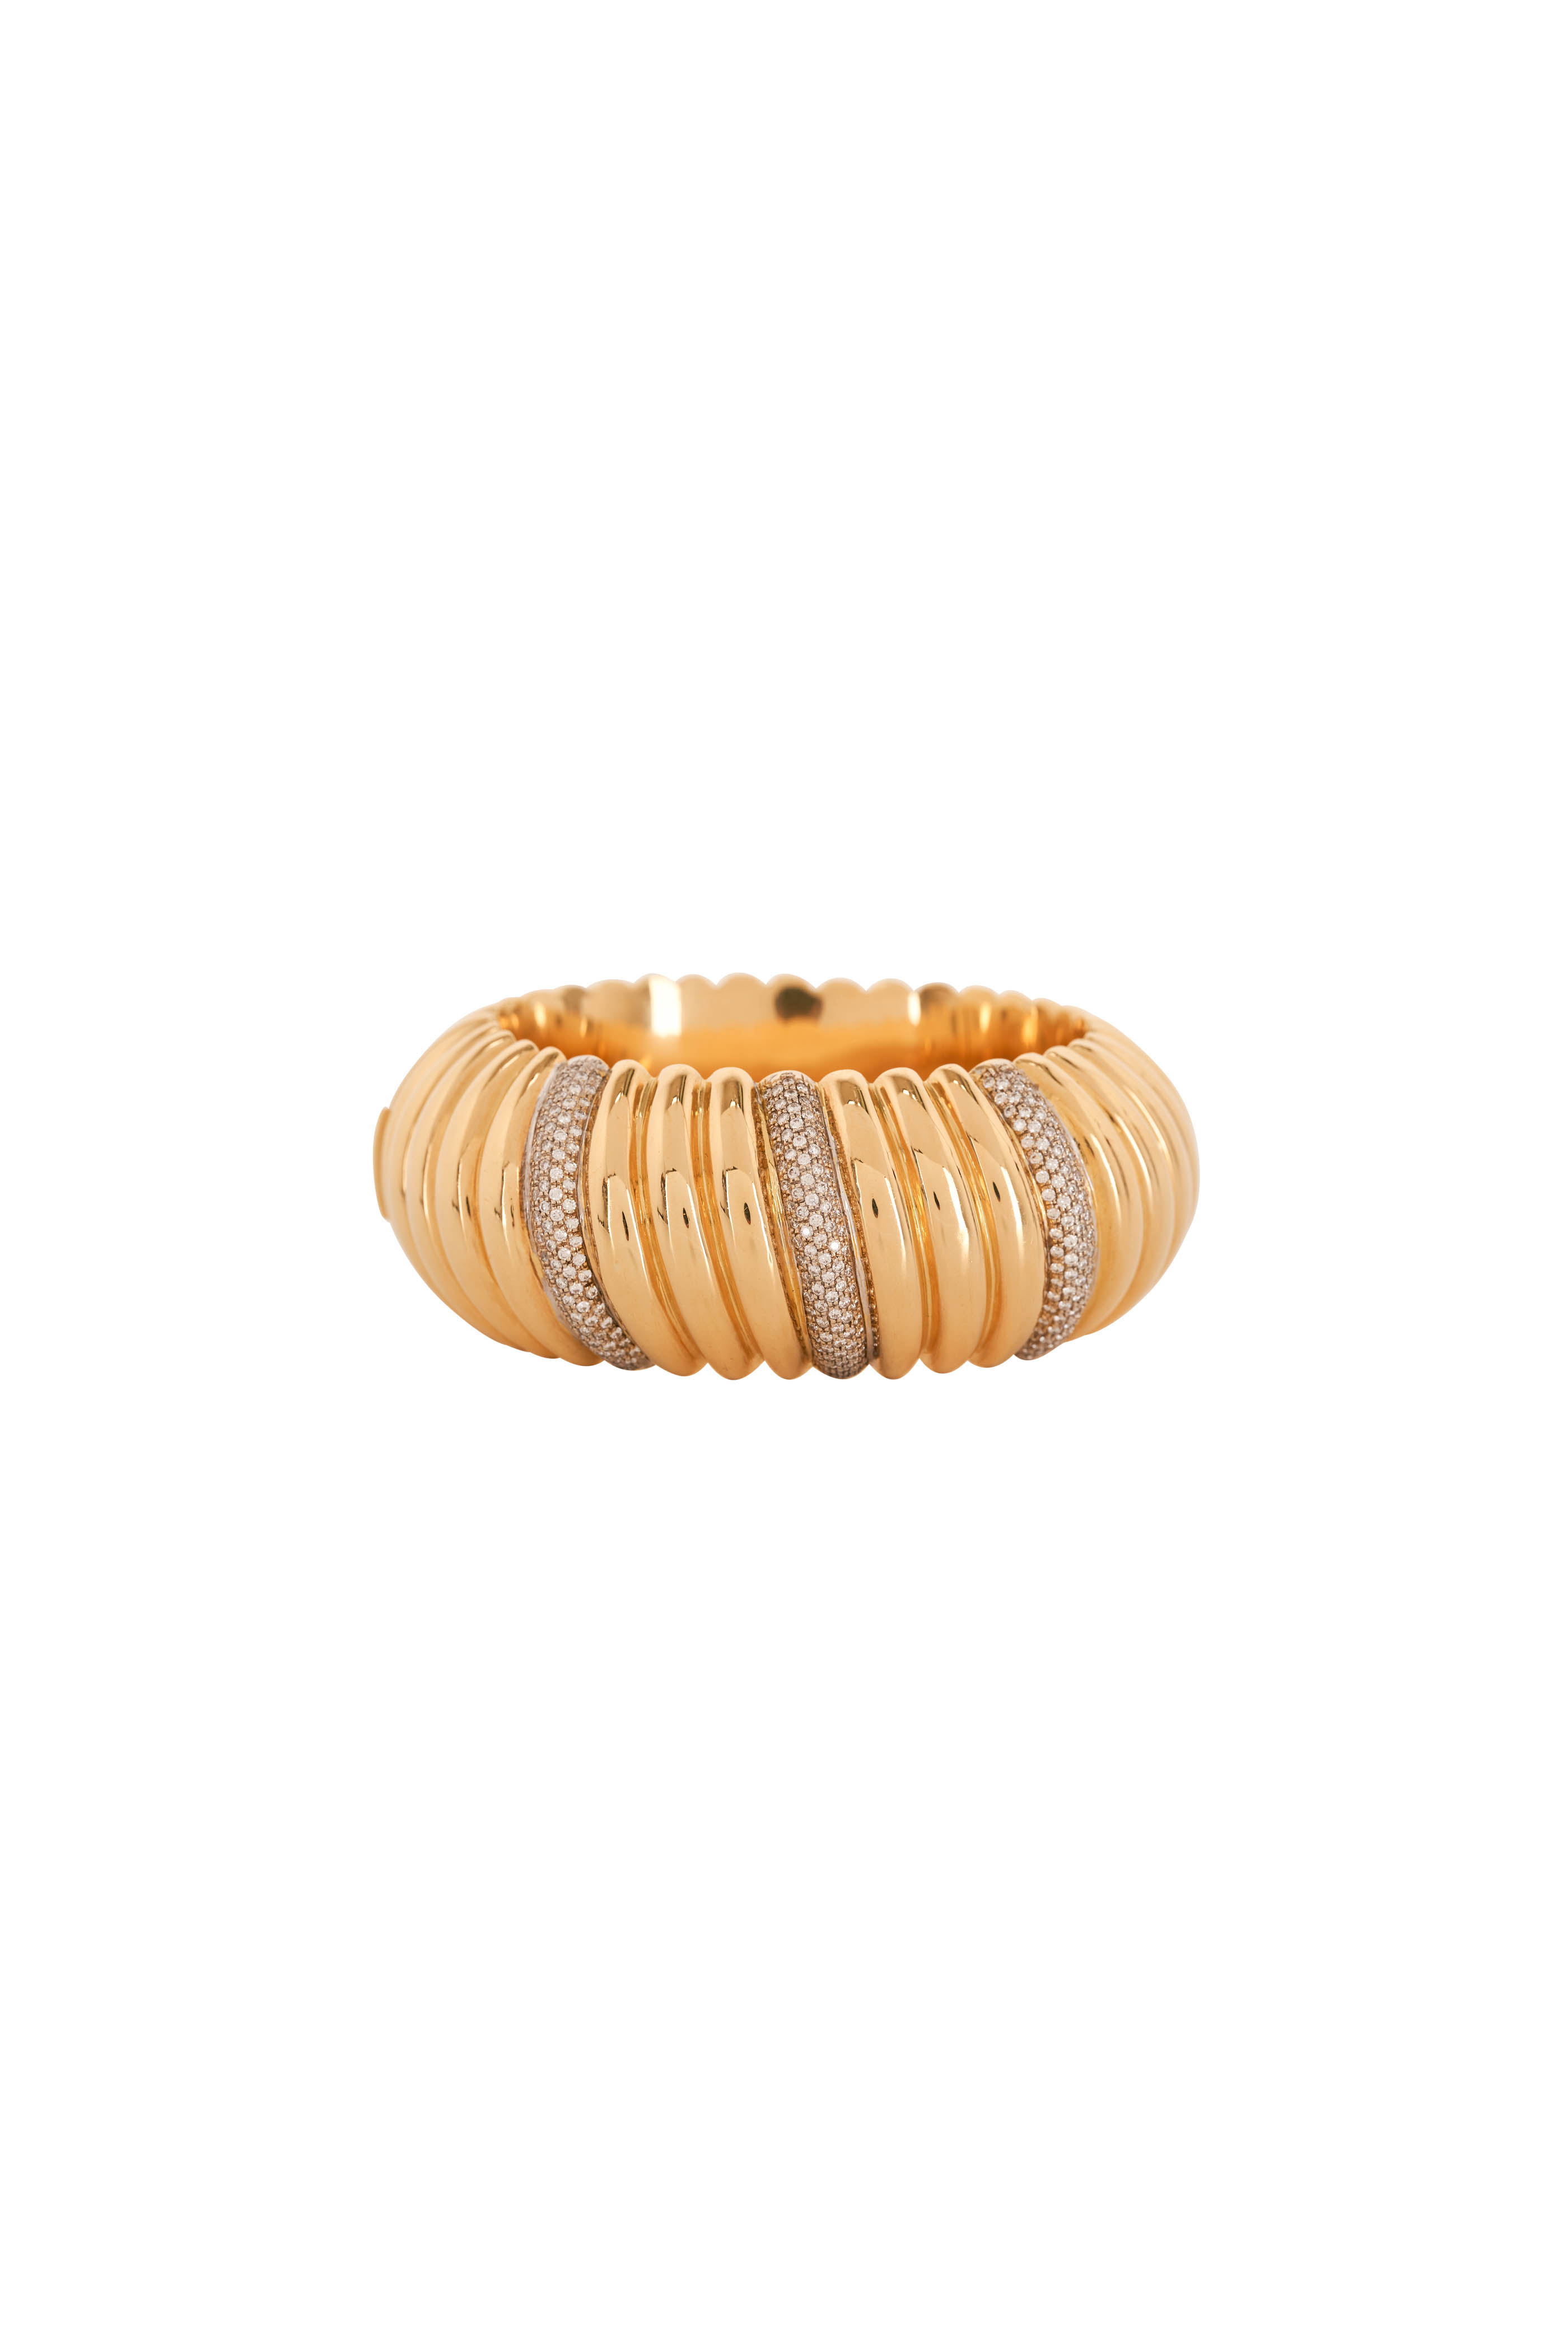 Ombré Nomad Bangle - Claudia Mae Jewelry